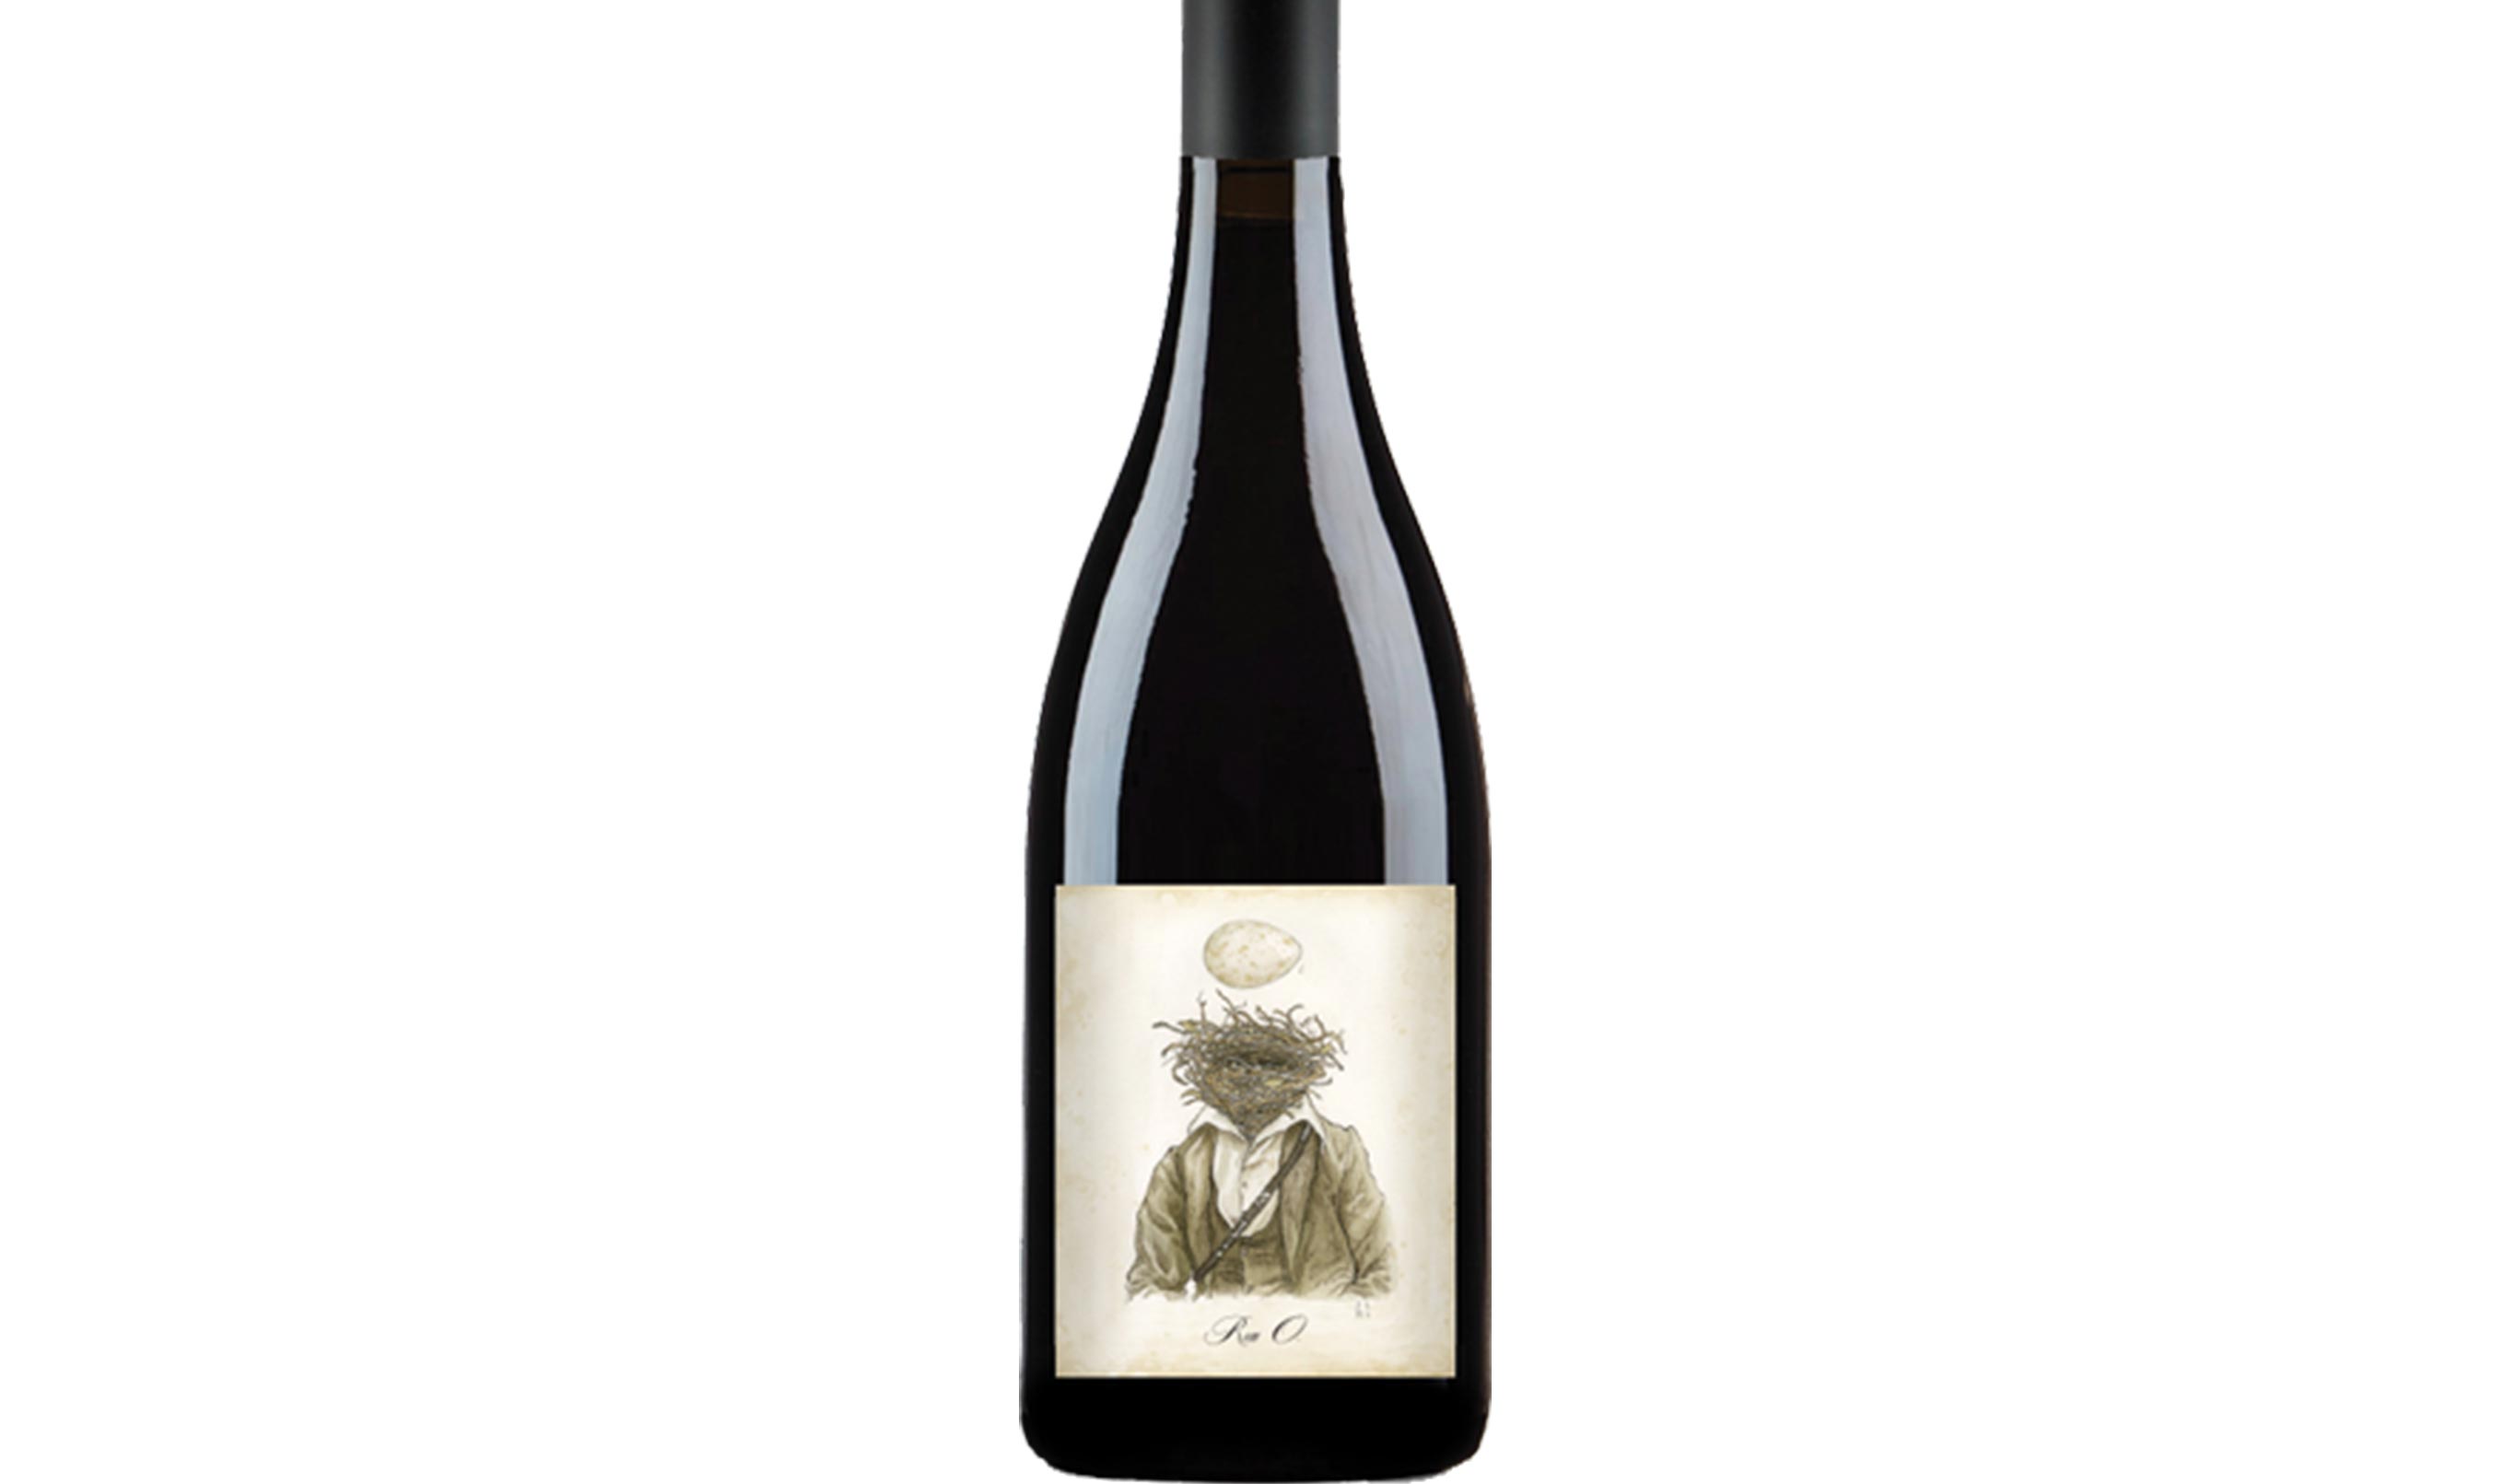 The Hatch Ross O 2016 is a cheerful, juicy red that features Pinot Noir and a jolt of Syrah